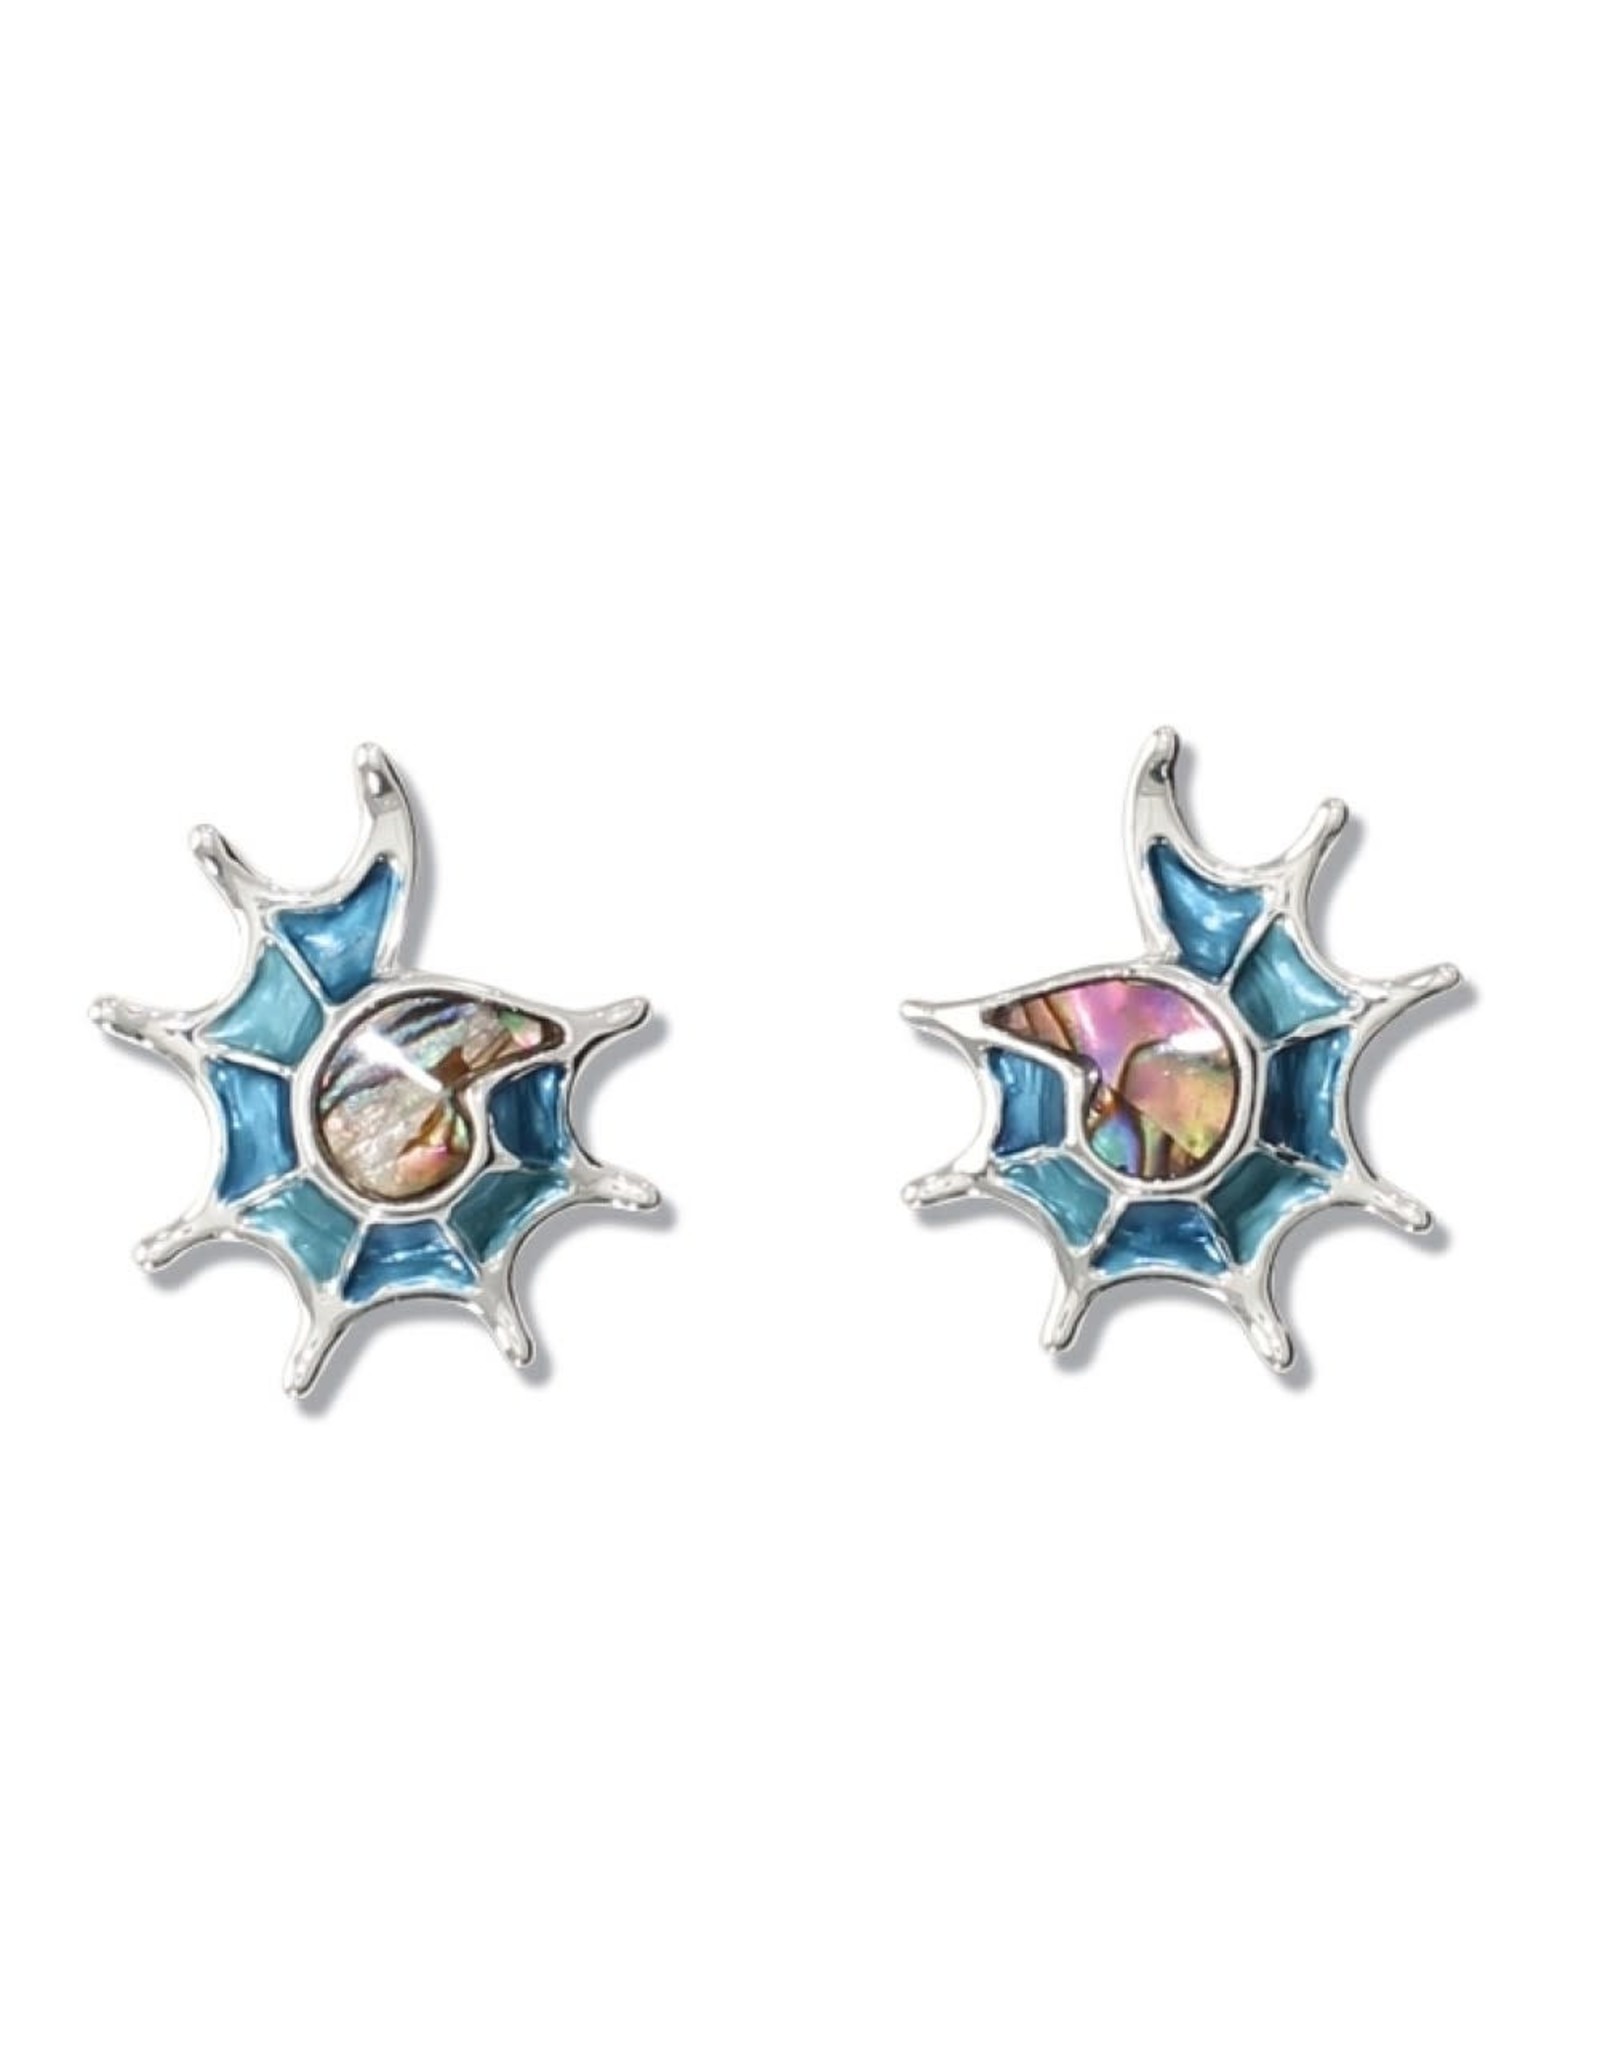 Periwinkle by Barlow Silver Conch Shell Earrings W Abalone Inlay